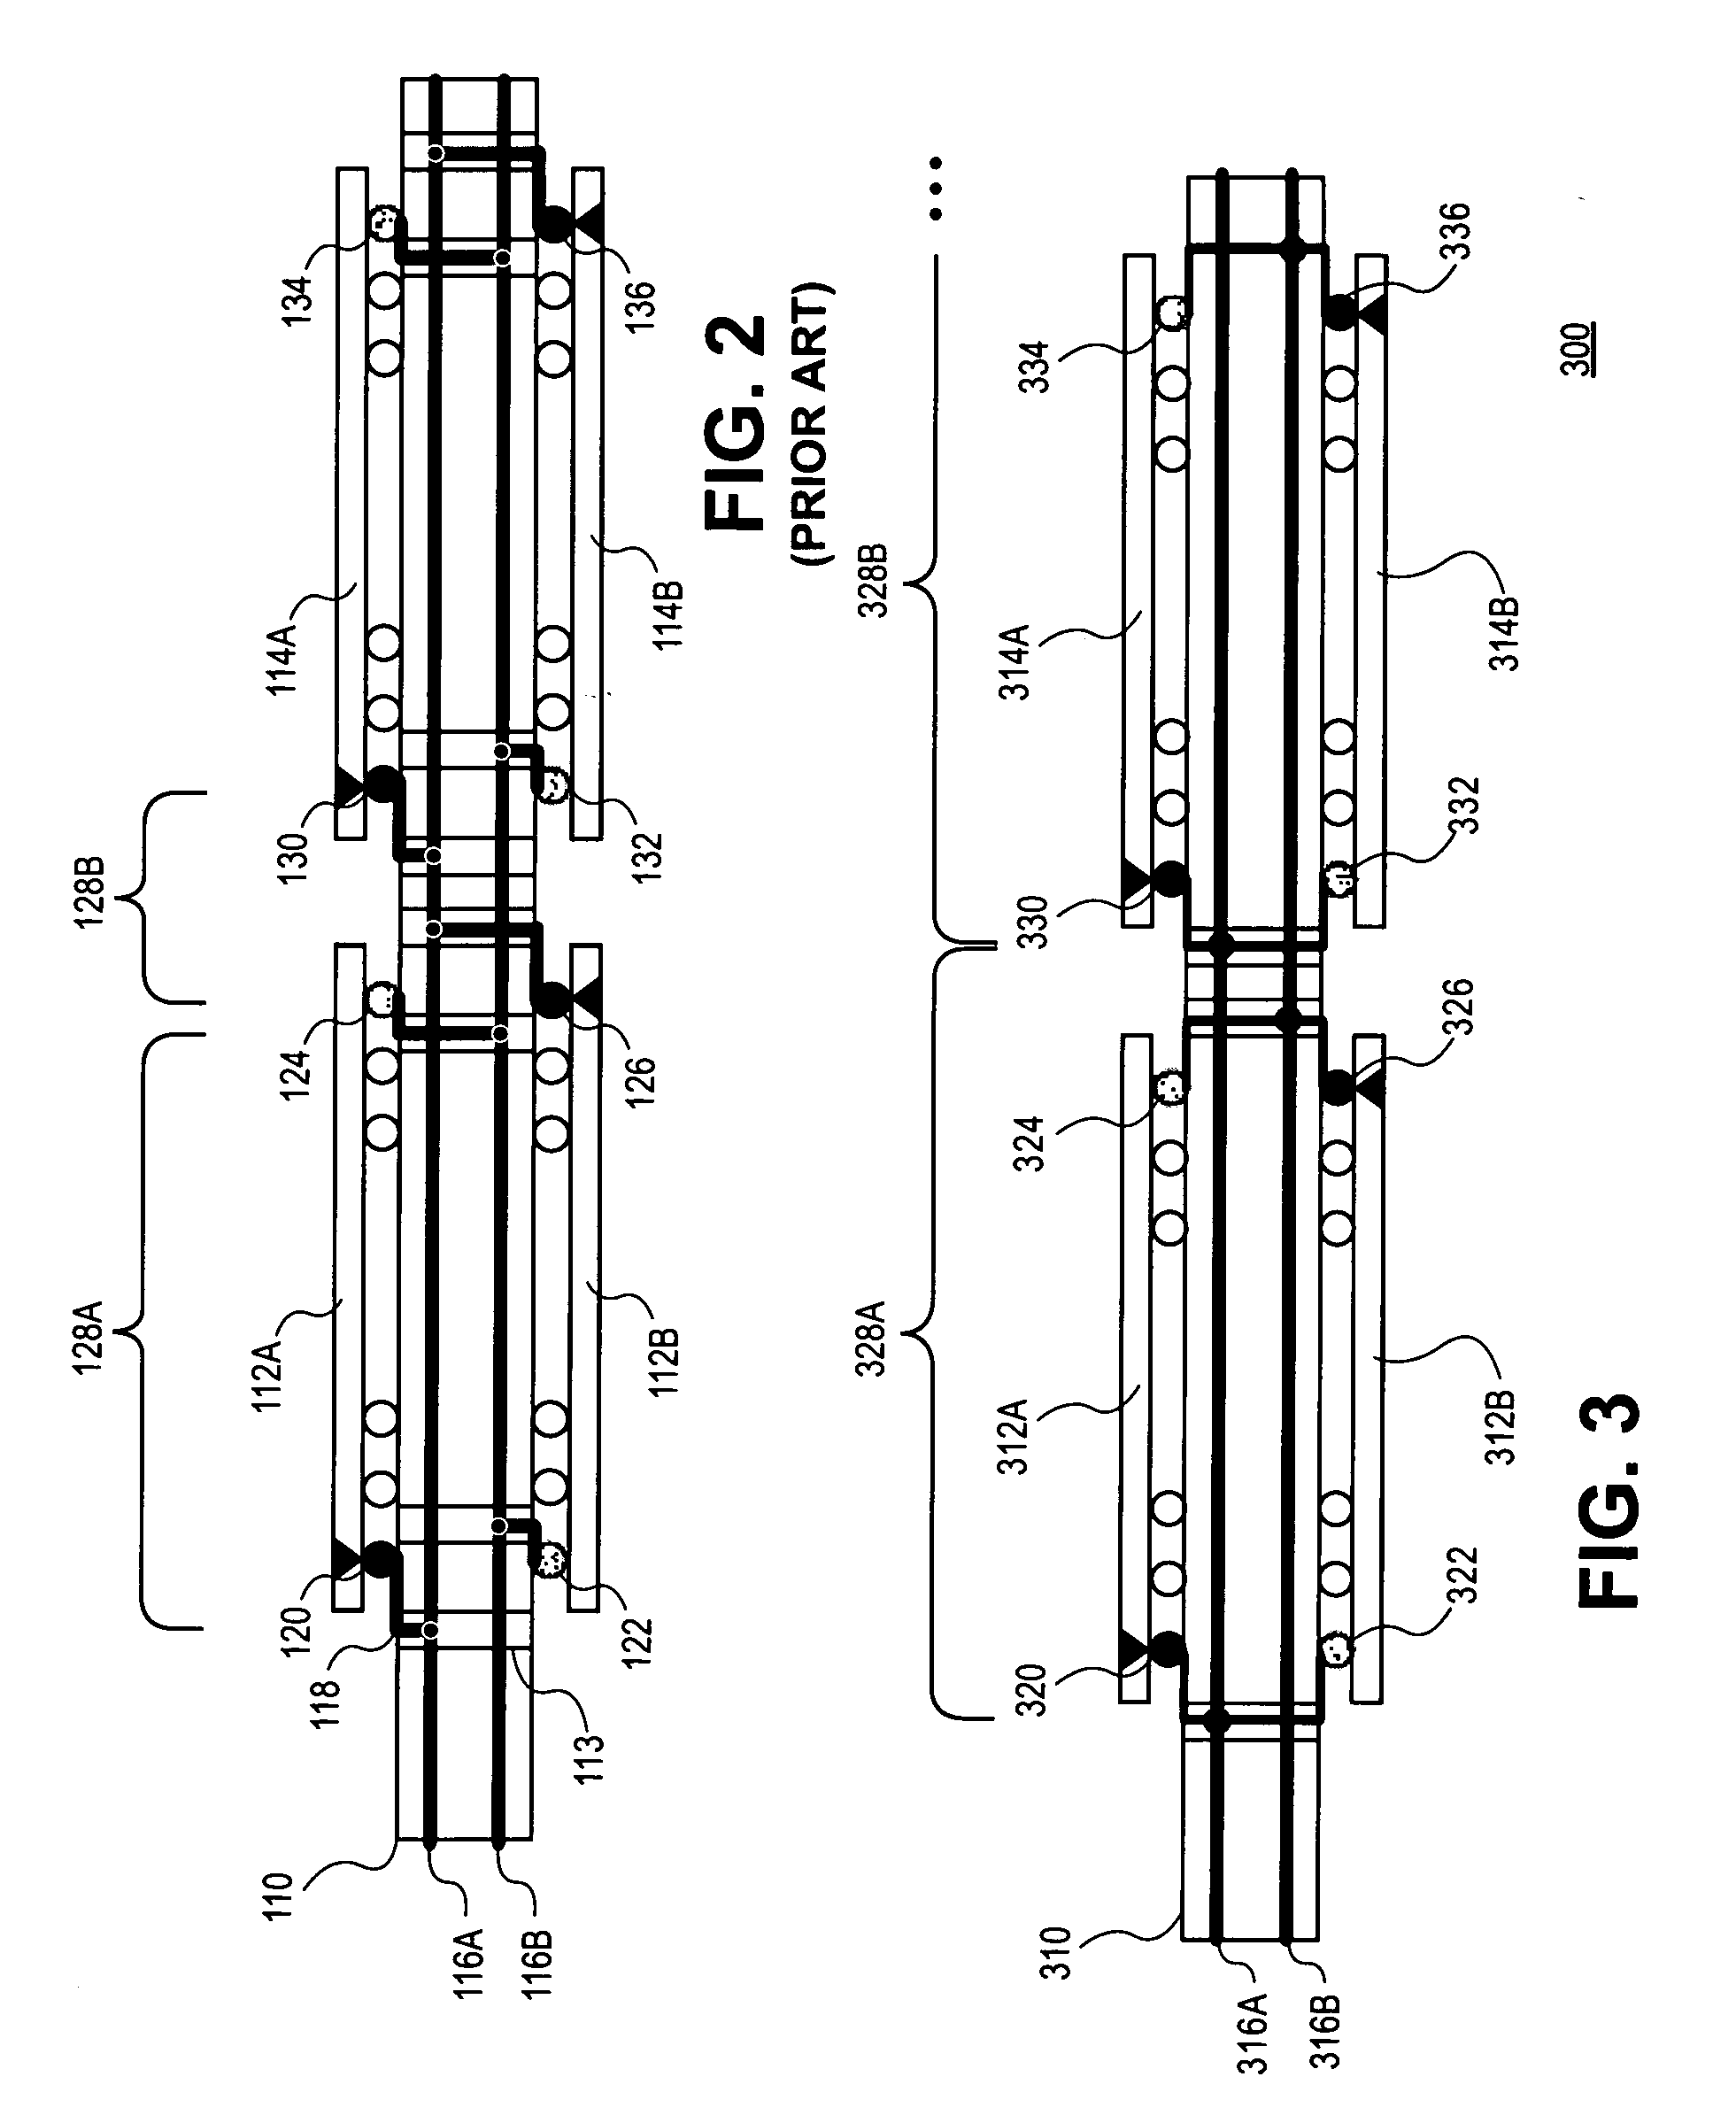 Apparatus and method for initialization of a double-sided dimm having at least one pair of mirrored pins